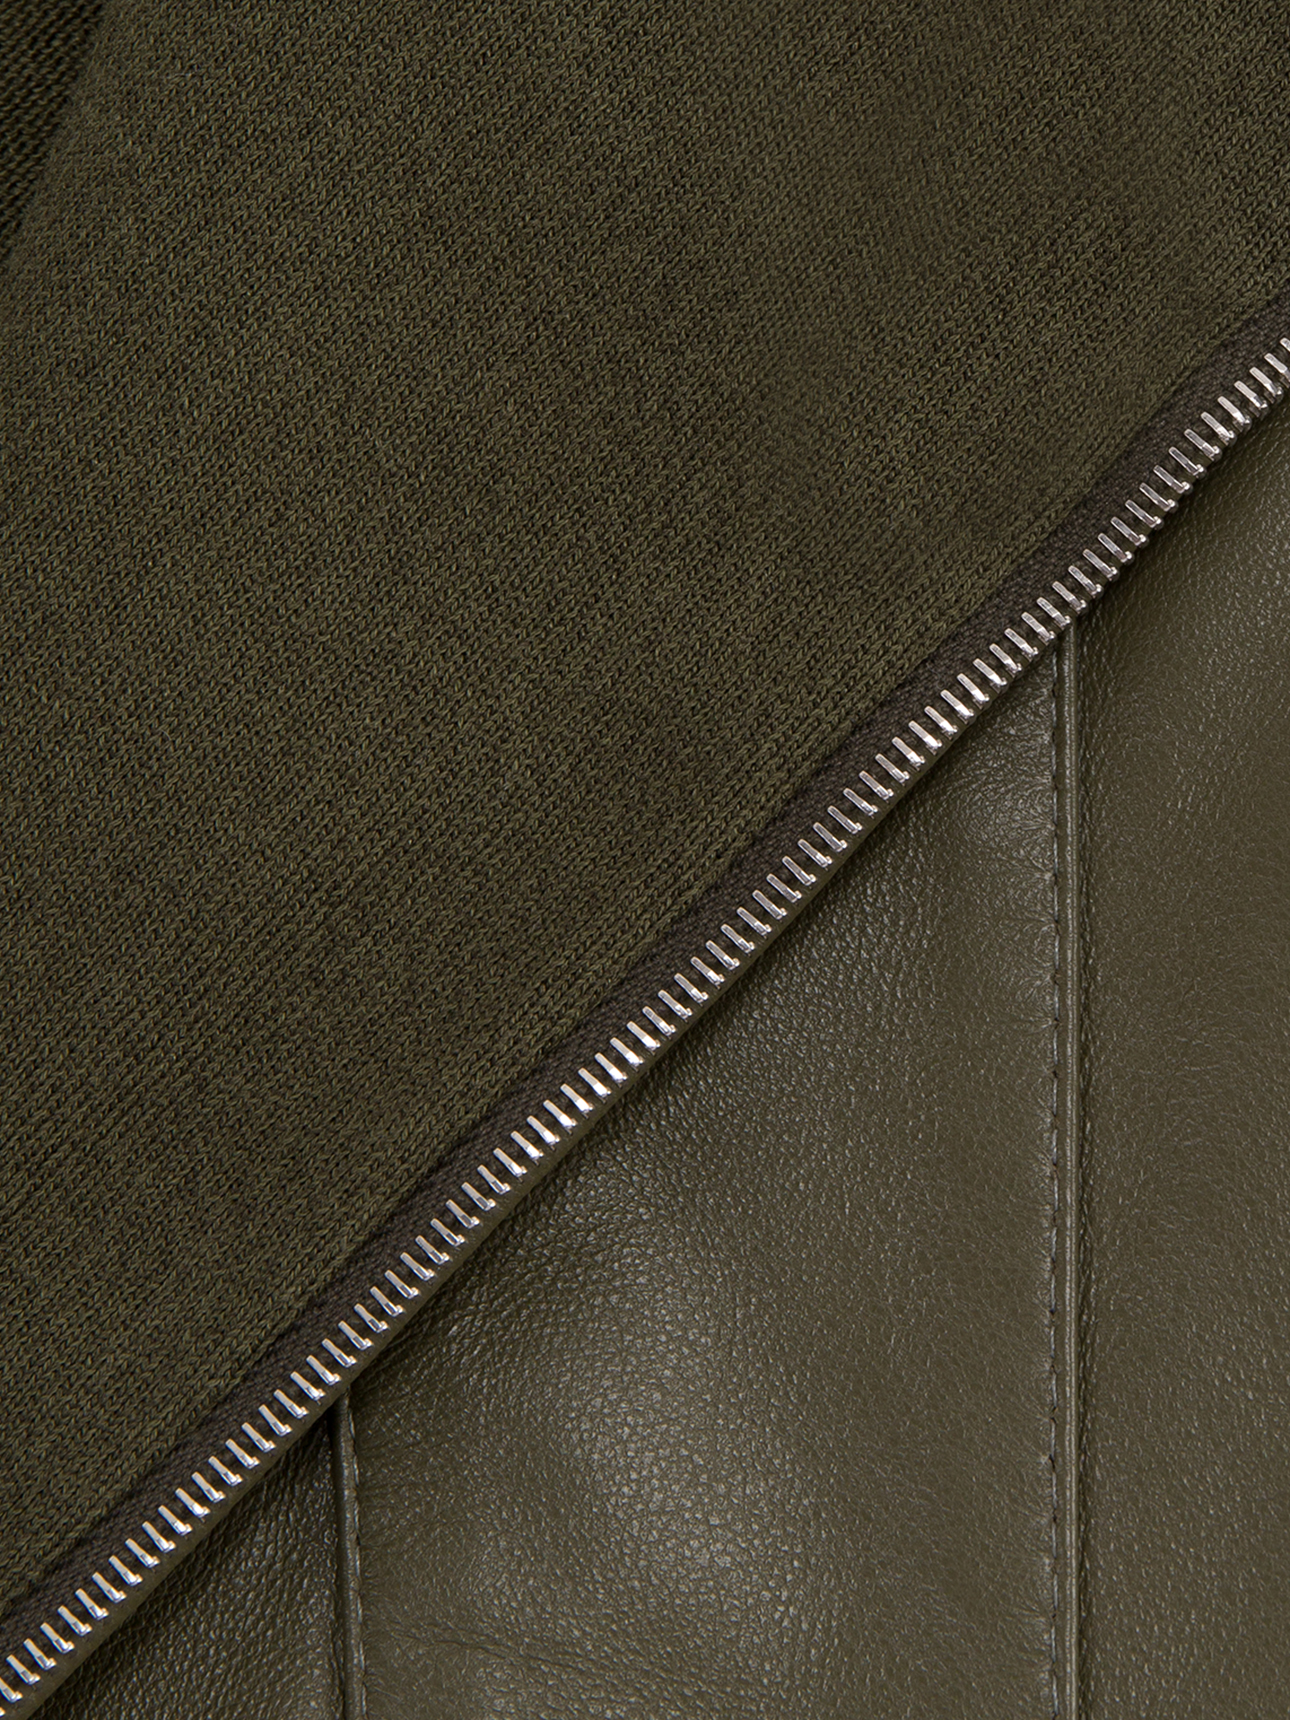 Jacket with Calfskin and Crocodile Details